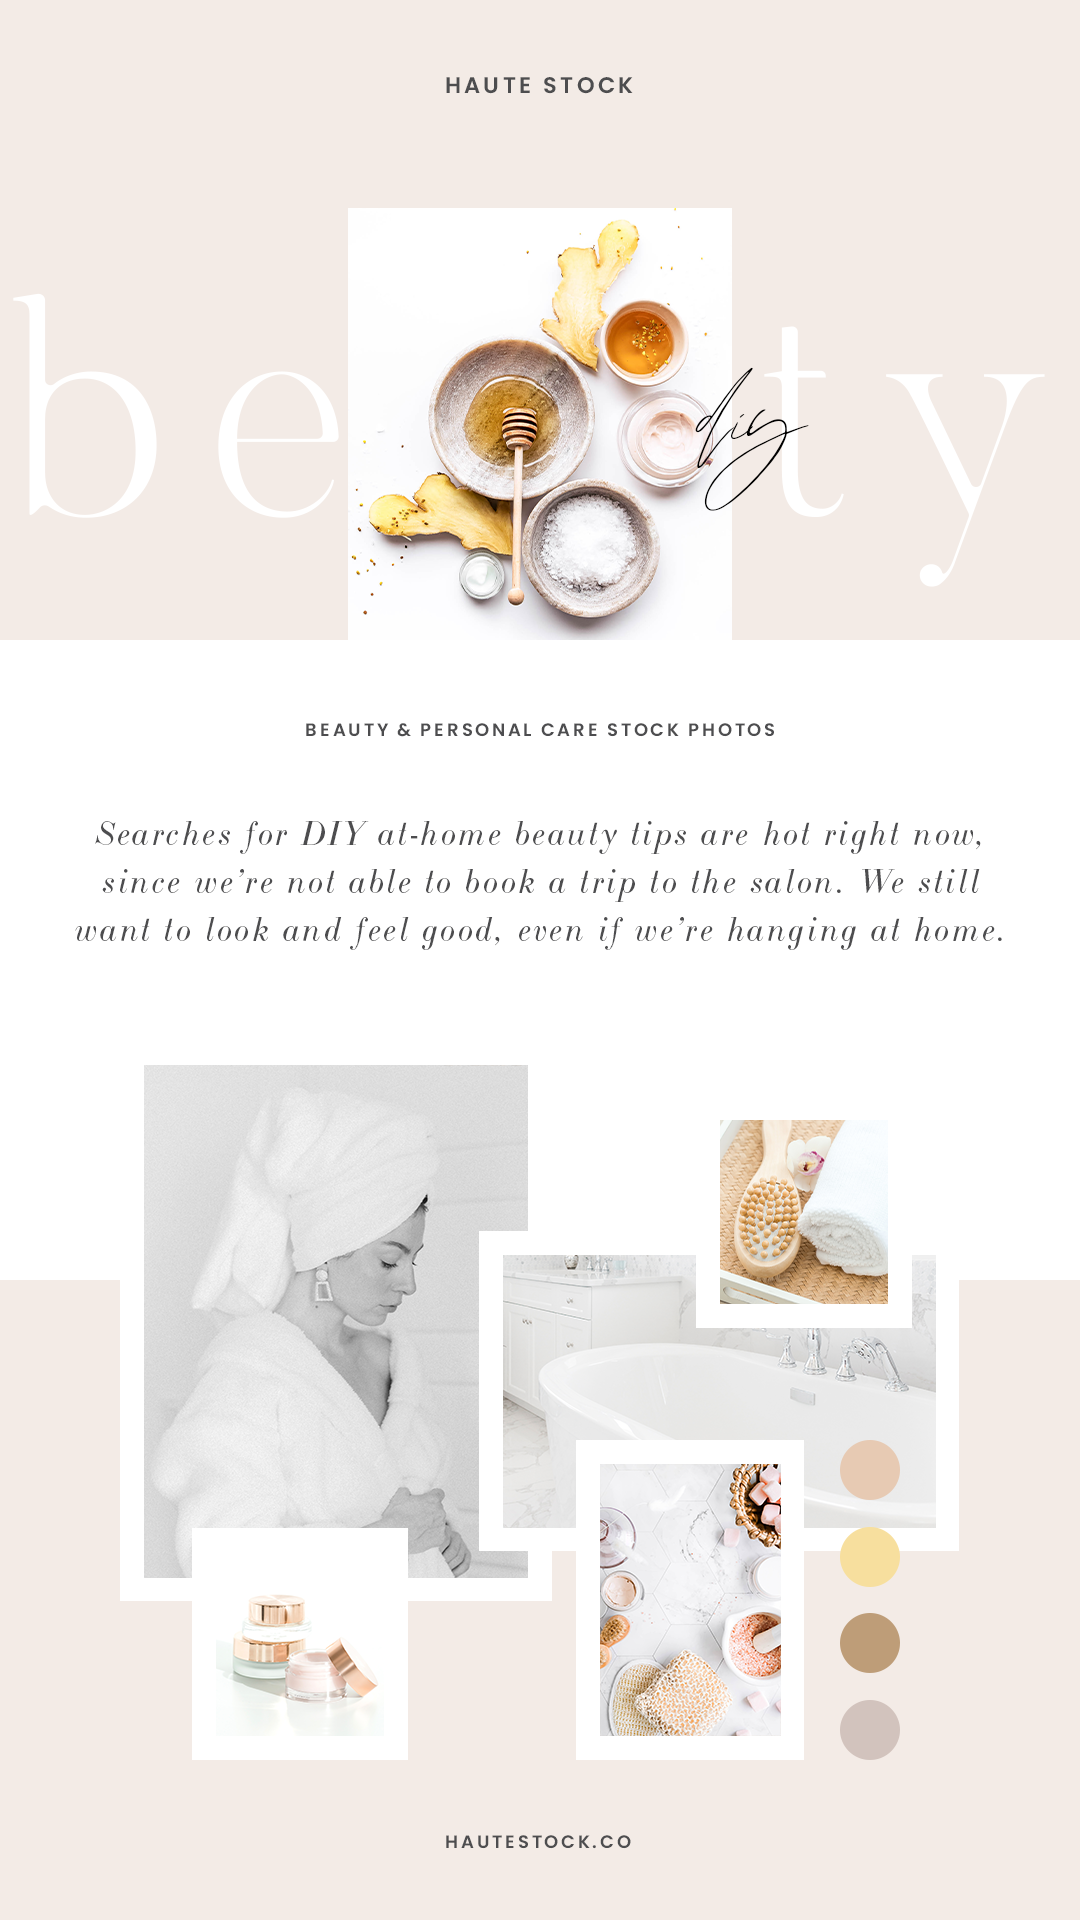 Feel pretty with images from Haute Stock’s Fashion &amp; Beauty category, and share your top tips with your community so they can also feel good. Collections featured in the above moodboard: Self-Care, Rejuvenate, Bedroom, Laundry &amp; Bath.